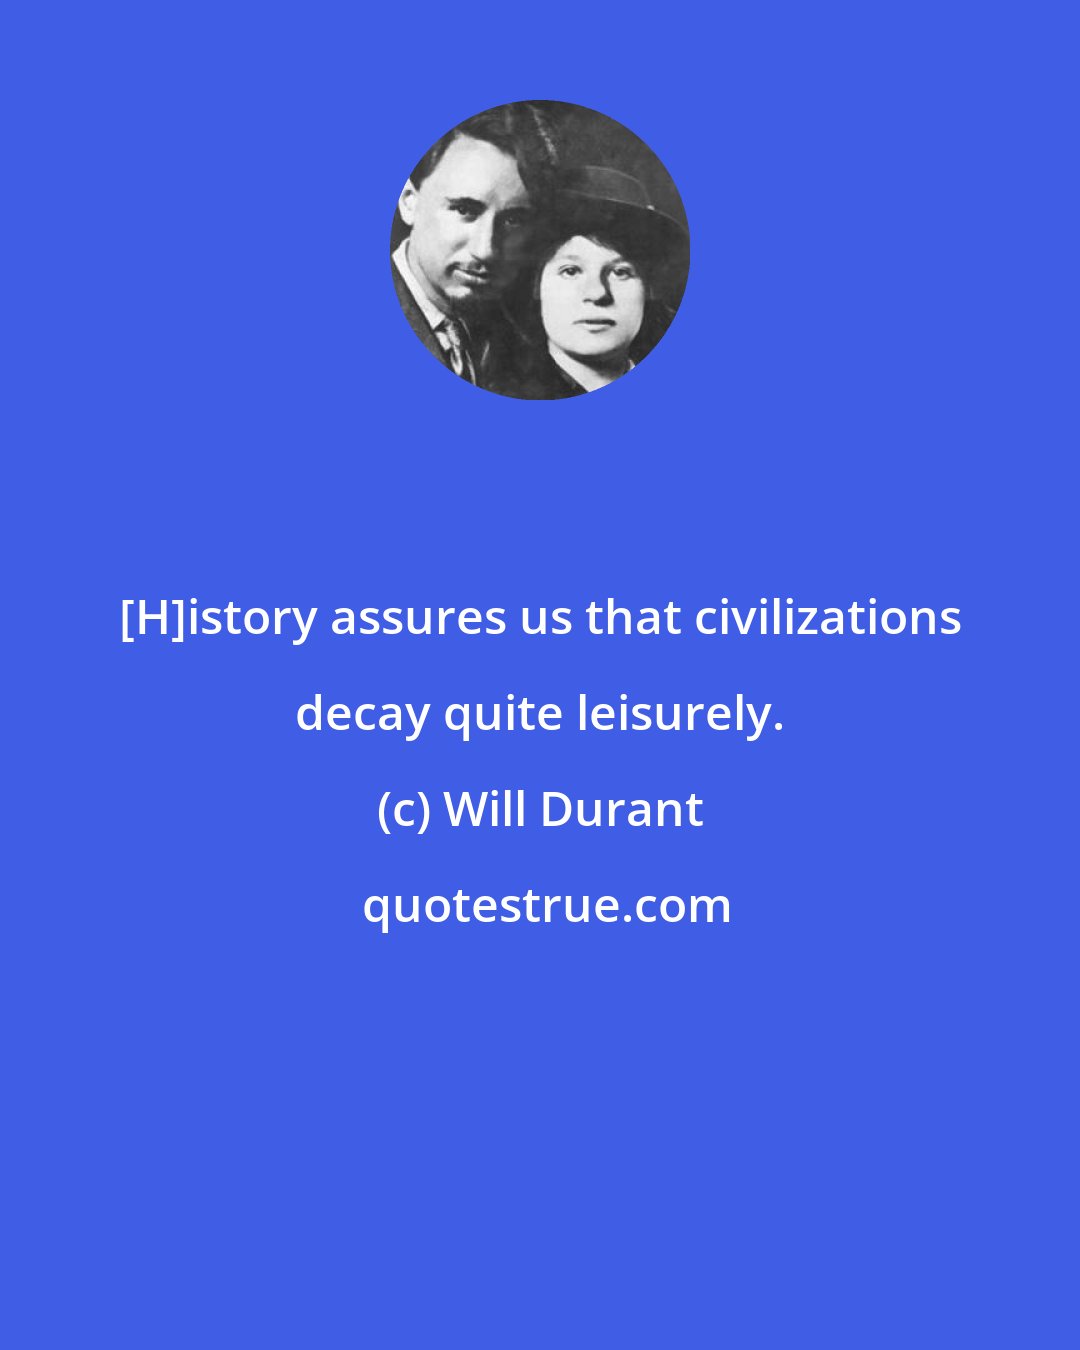 Will Durant: [H]istory assures us that civilizations decay quite leisurely.